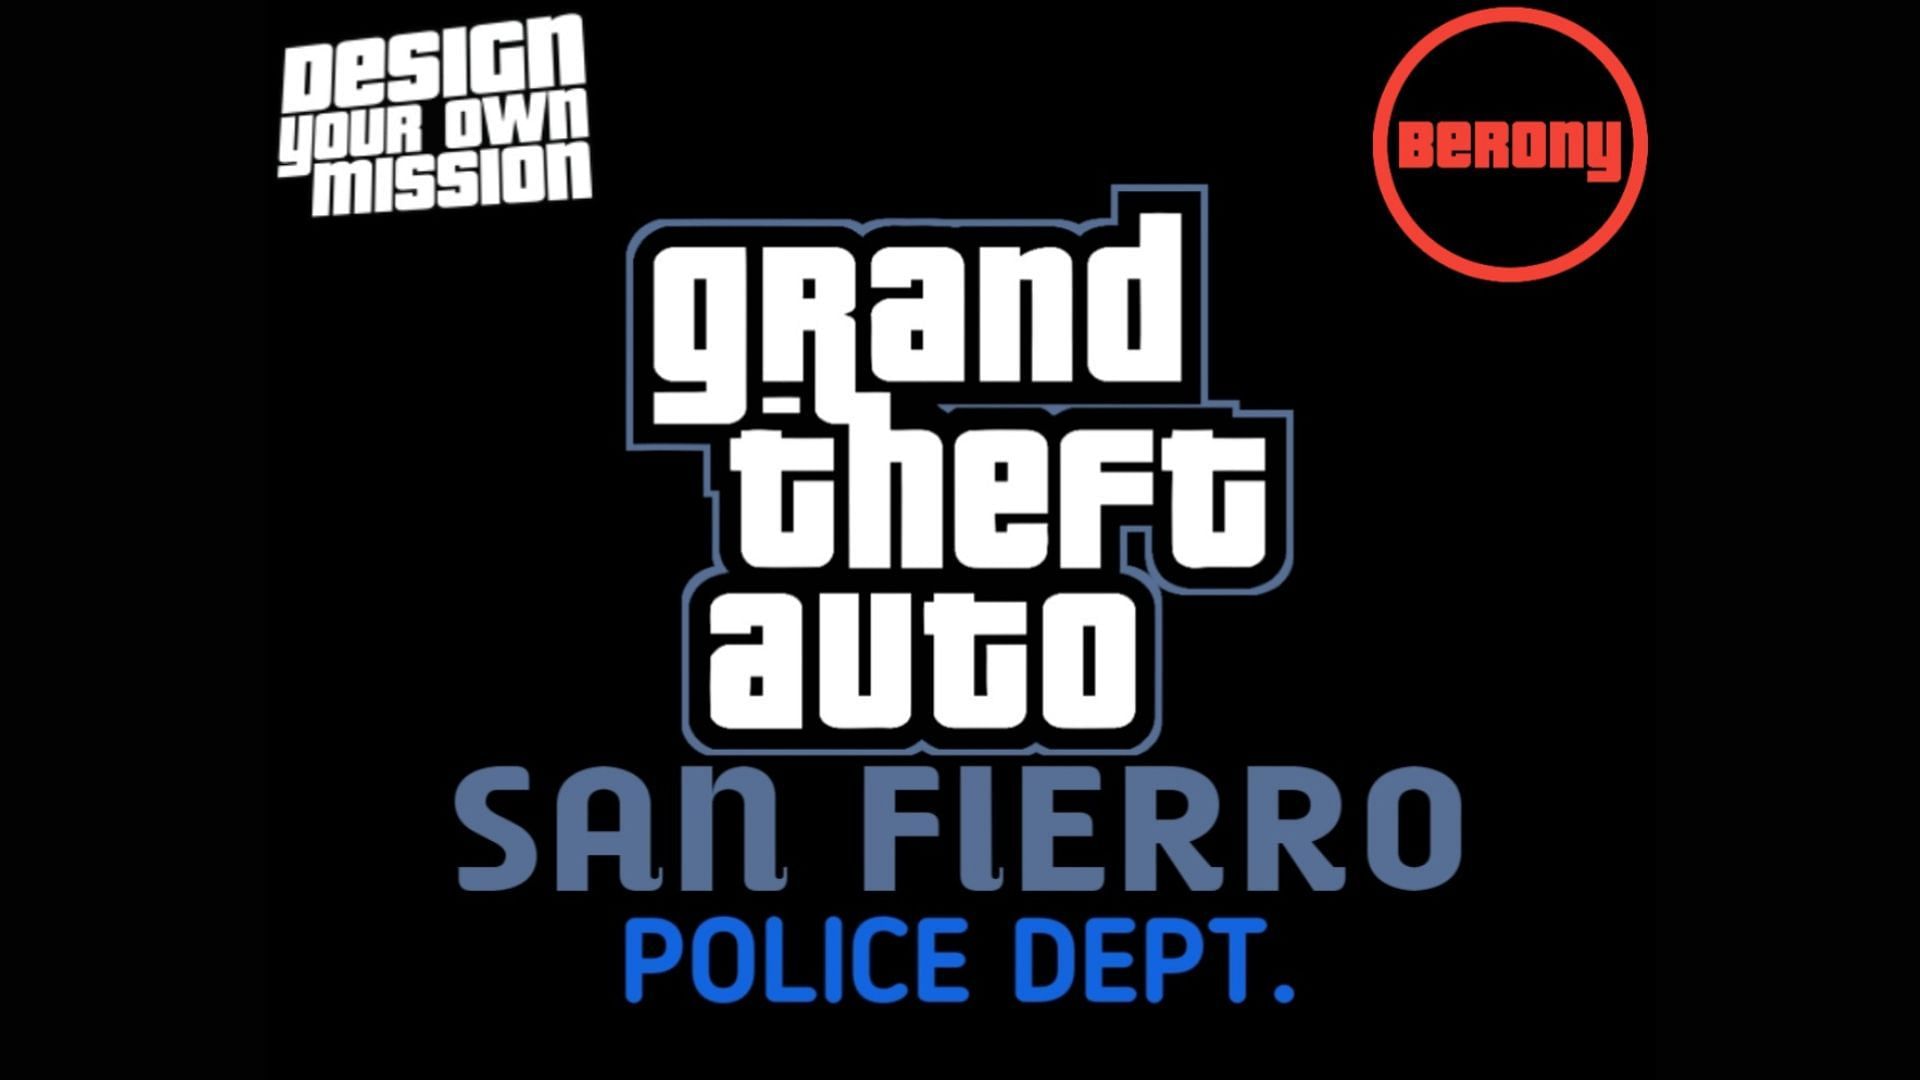 A brief report on the newly released GTA San Andreas mod thats adds a brand new cop mission playable as Officer Jeffrey (Image via Berony on moddb.com)